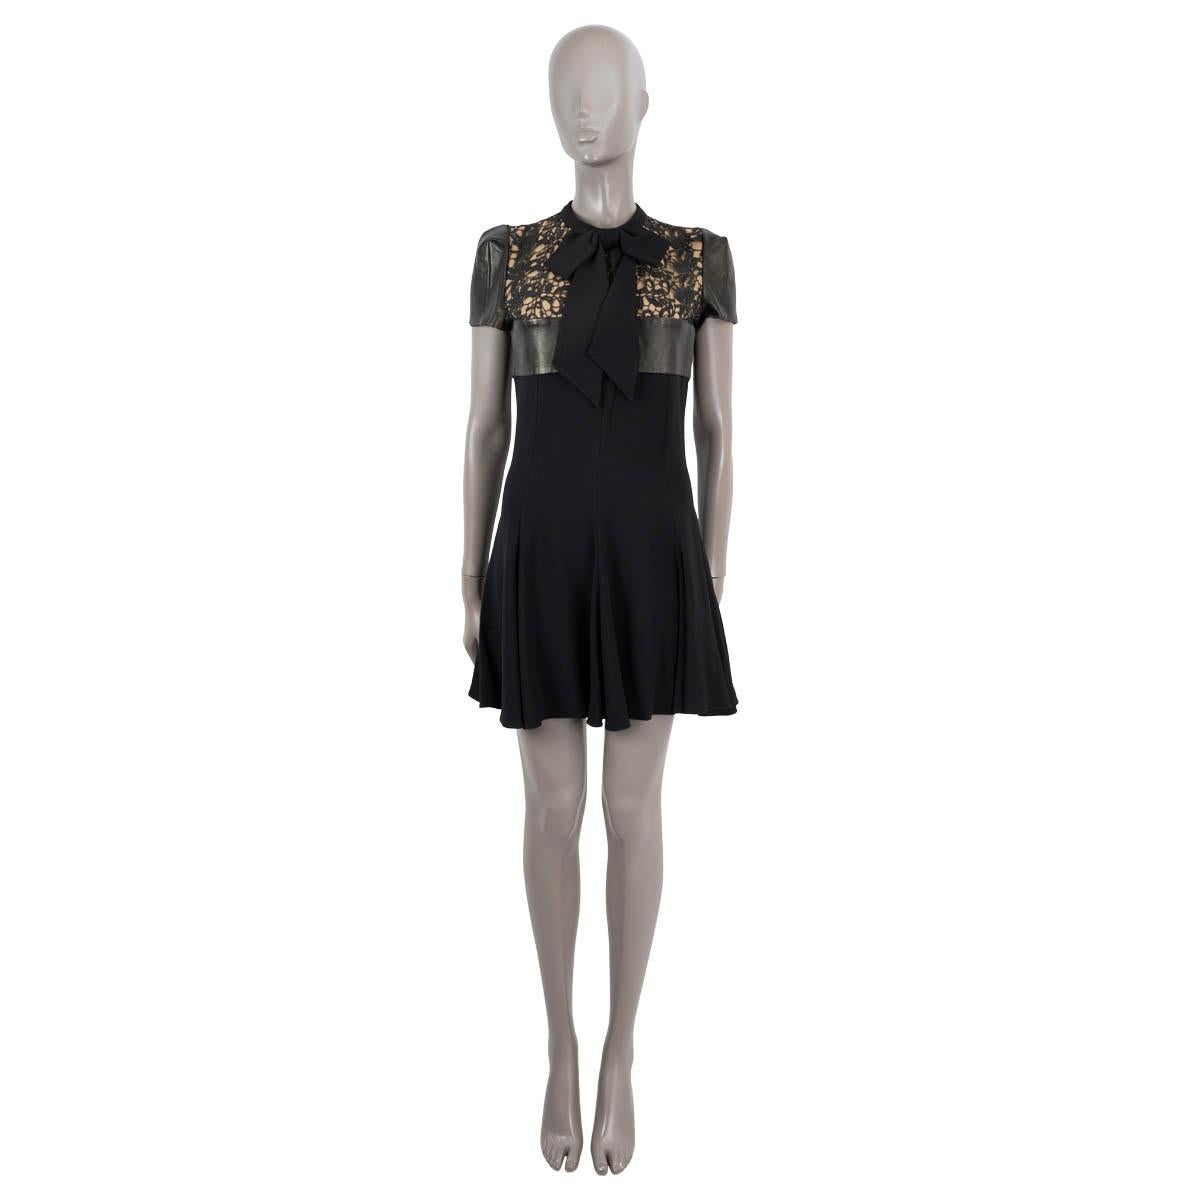 100% authentic Saint Laurent lace panelled dress in black acetate (57%) and viscose (43%). Features short leather sleeves, a pussy-bow neck and a leather waist band. Closes with a concealed zipper and a hook in the back. Has been worn and is in